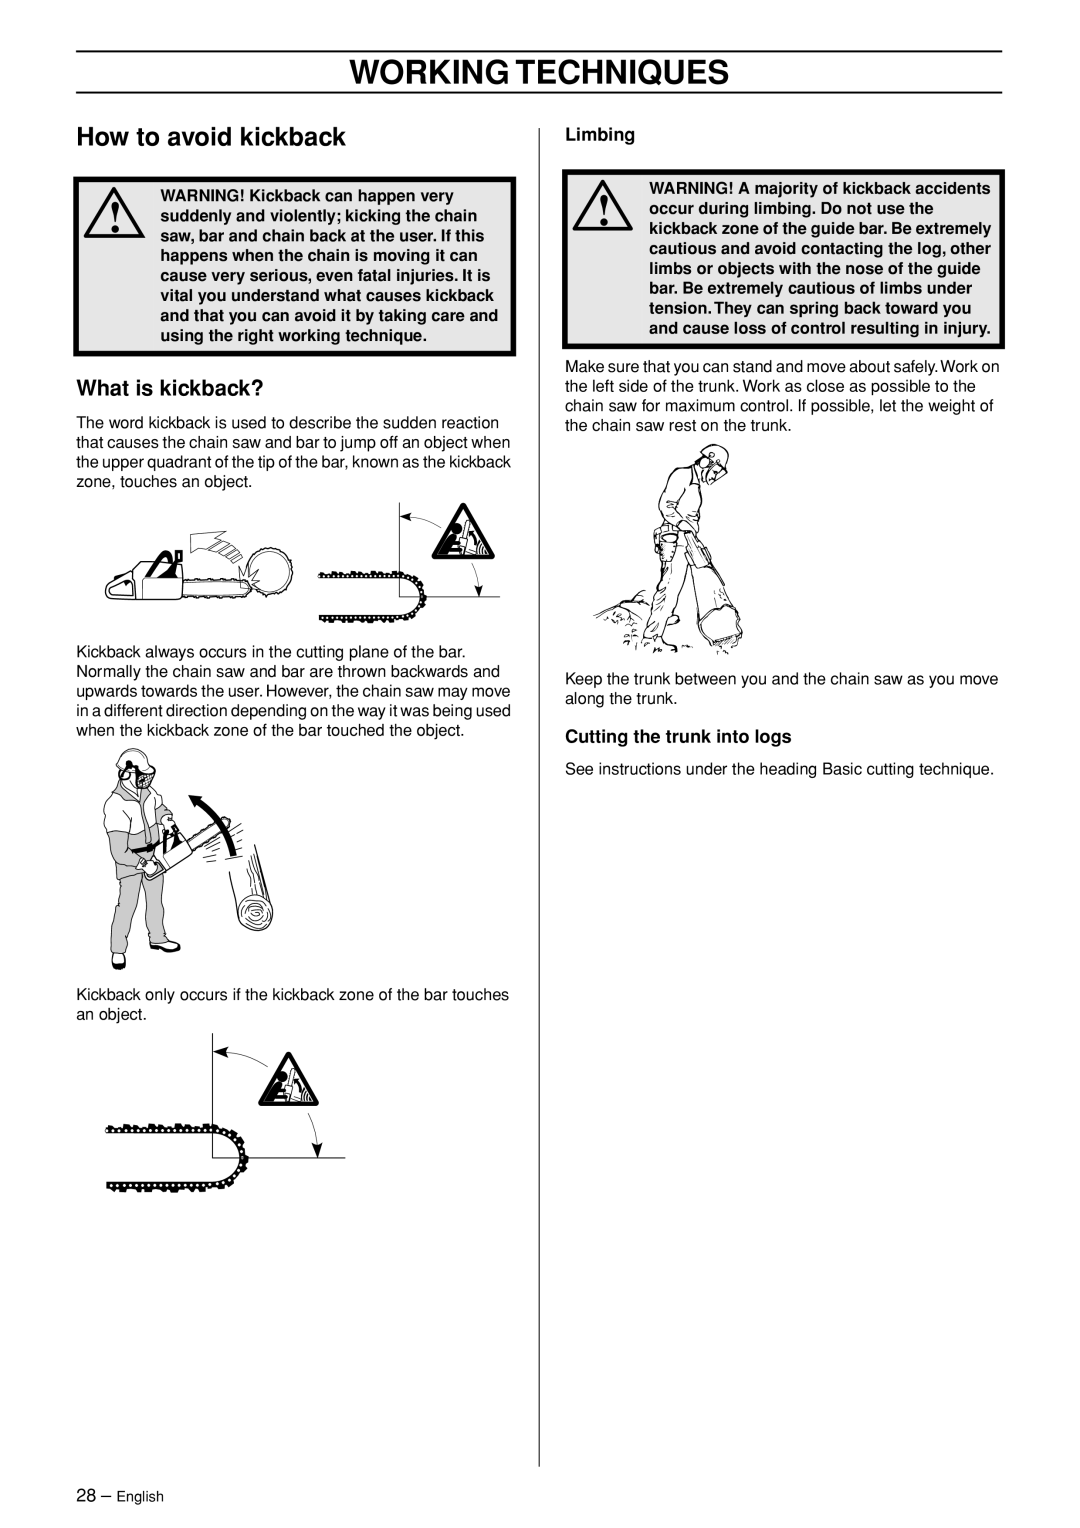 Jonsered CS 2153 manual How to avoid kickback, What is kickback?, Cutting the trunk into logs, Working Techniques, Limbing 